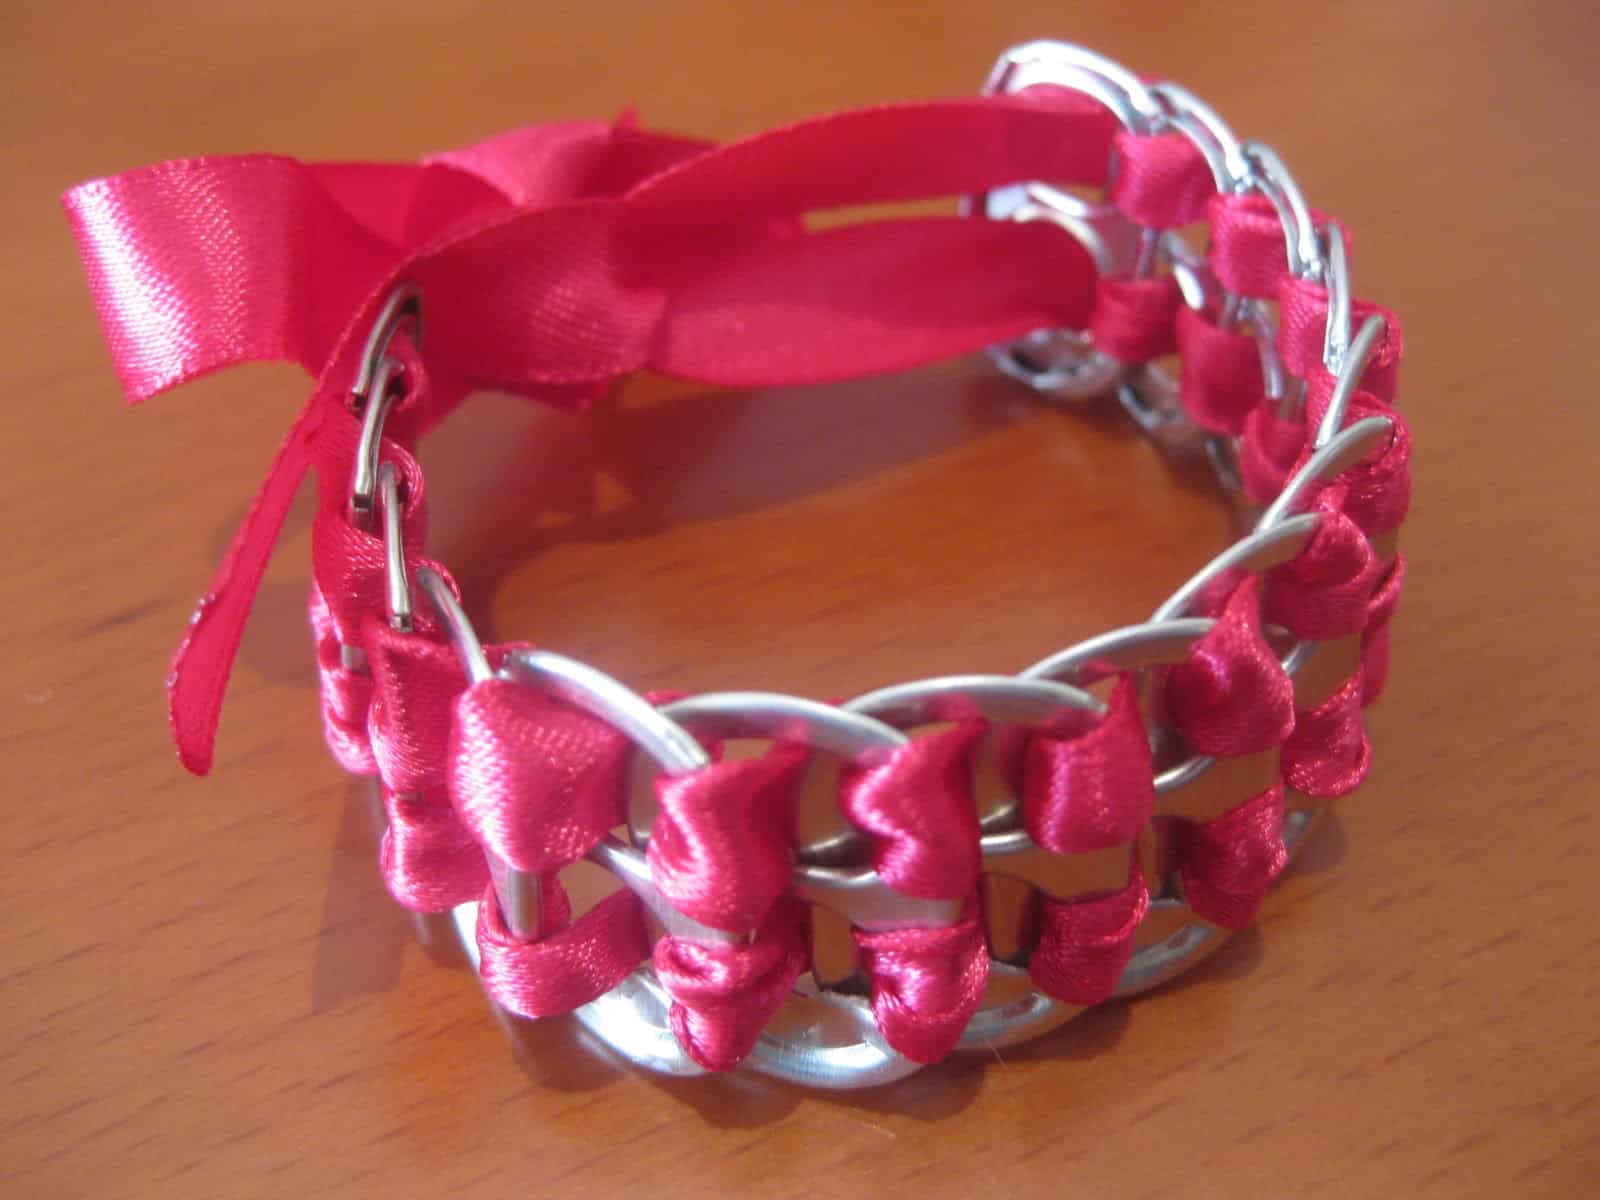 Pop tab bracelet with woven ribbons